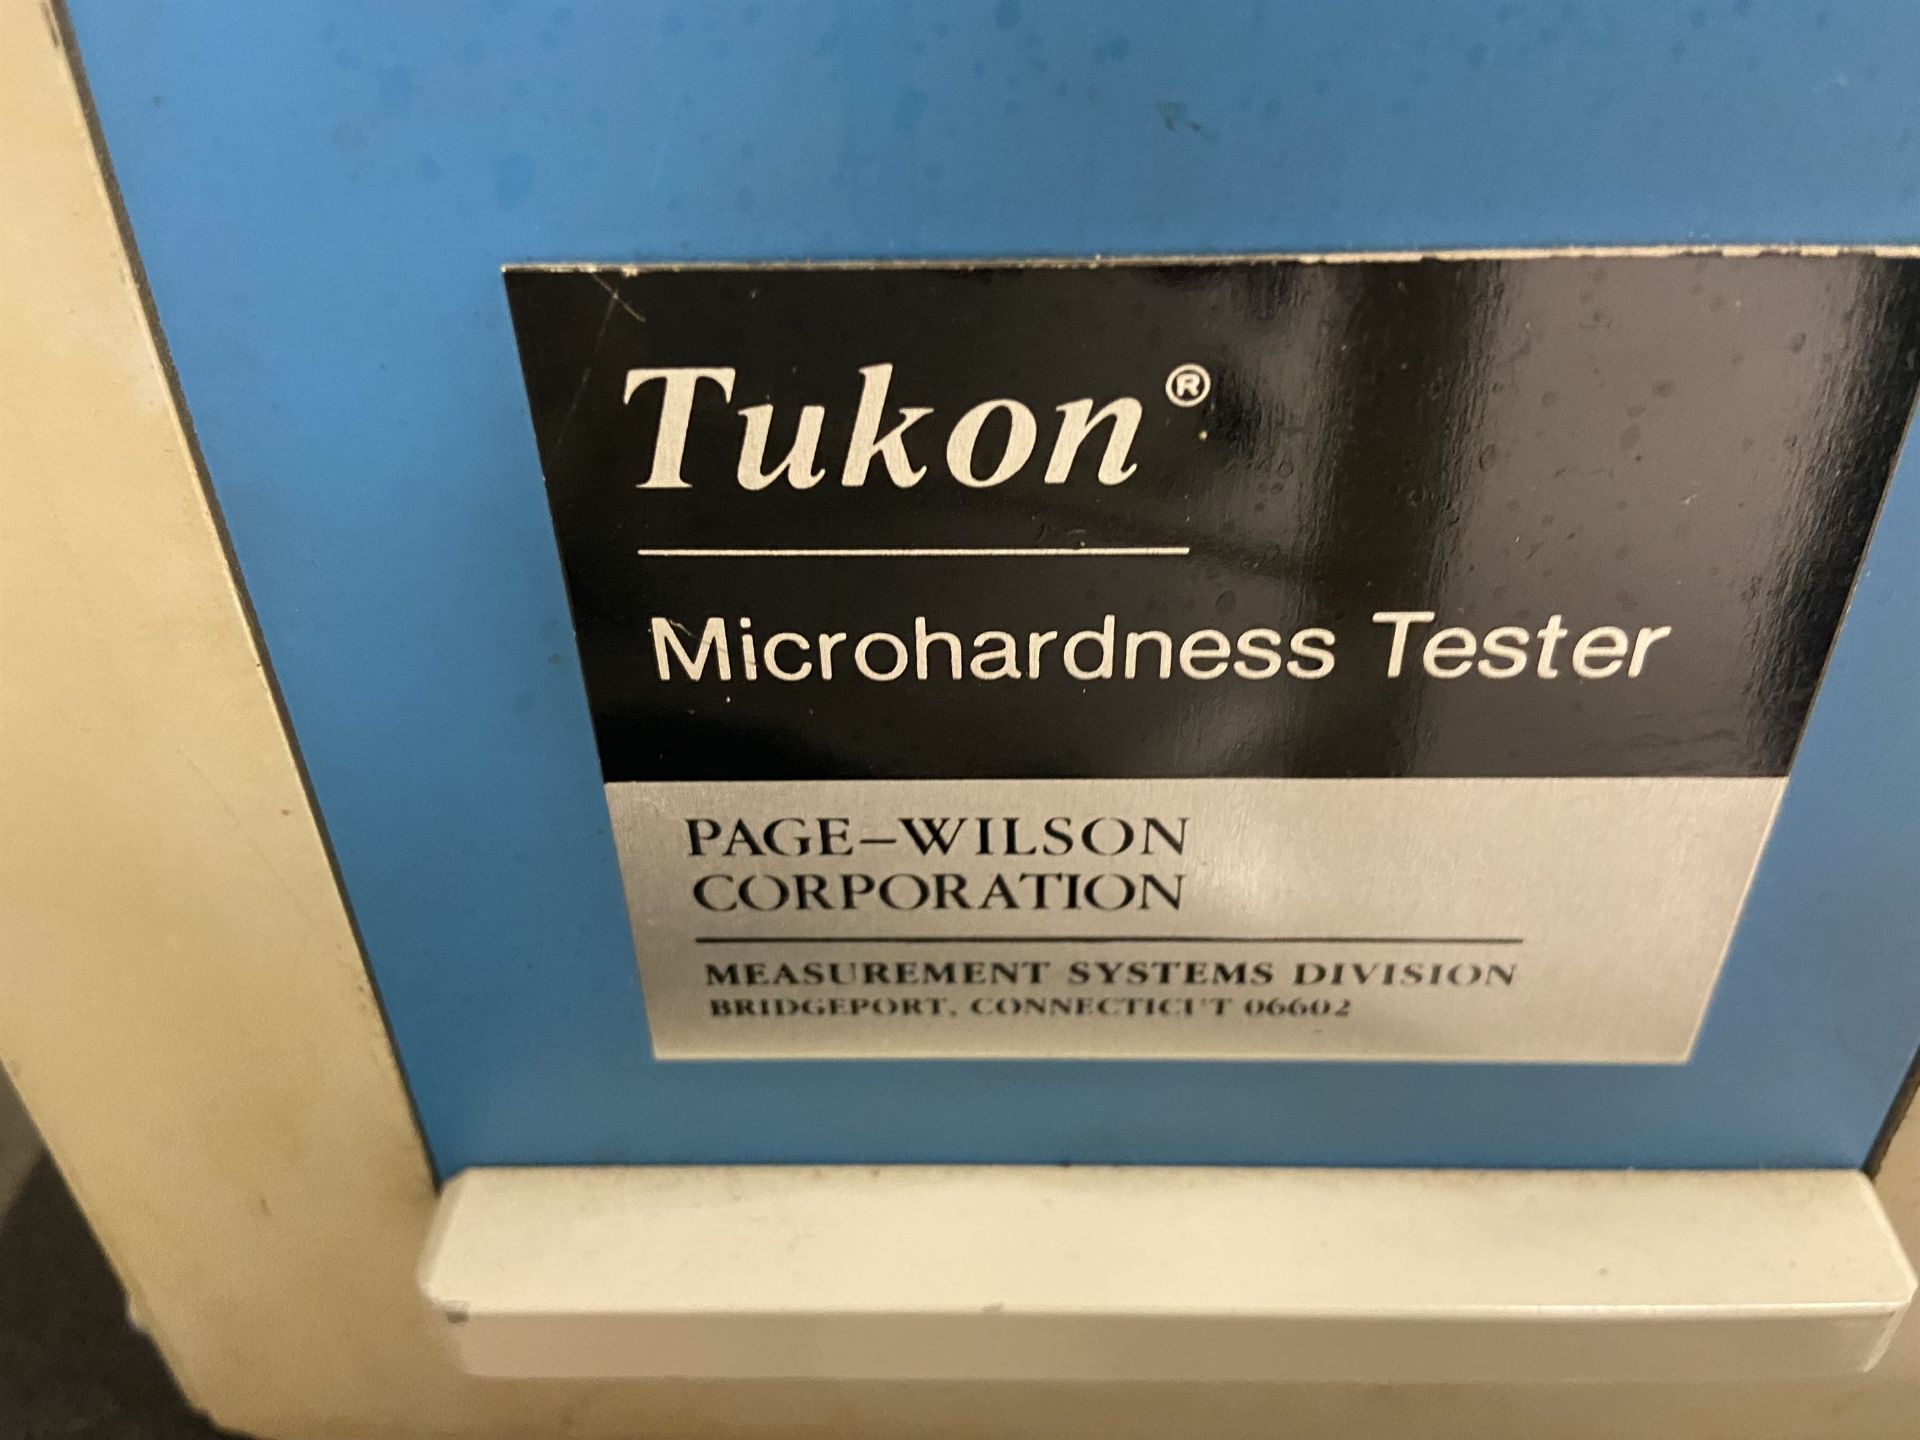 Lot of (2) Wilson Tukon 300 BMDF Micro Hardness Testers, s/n's MHT-001 / 85441 and MHT-002 / 91791 - Image 12 of 14